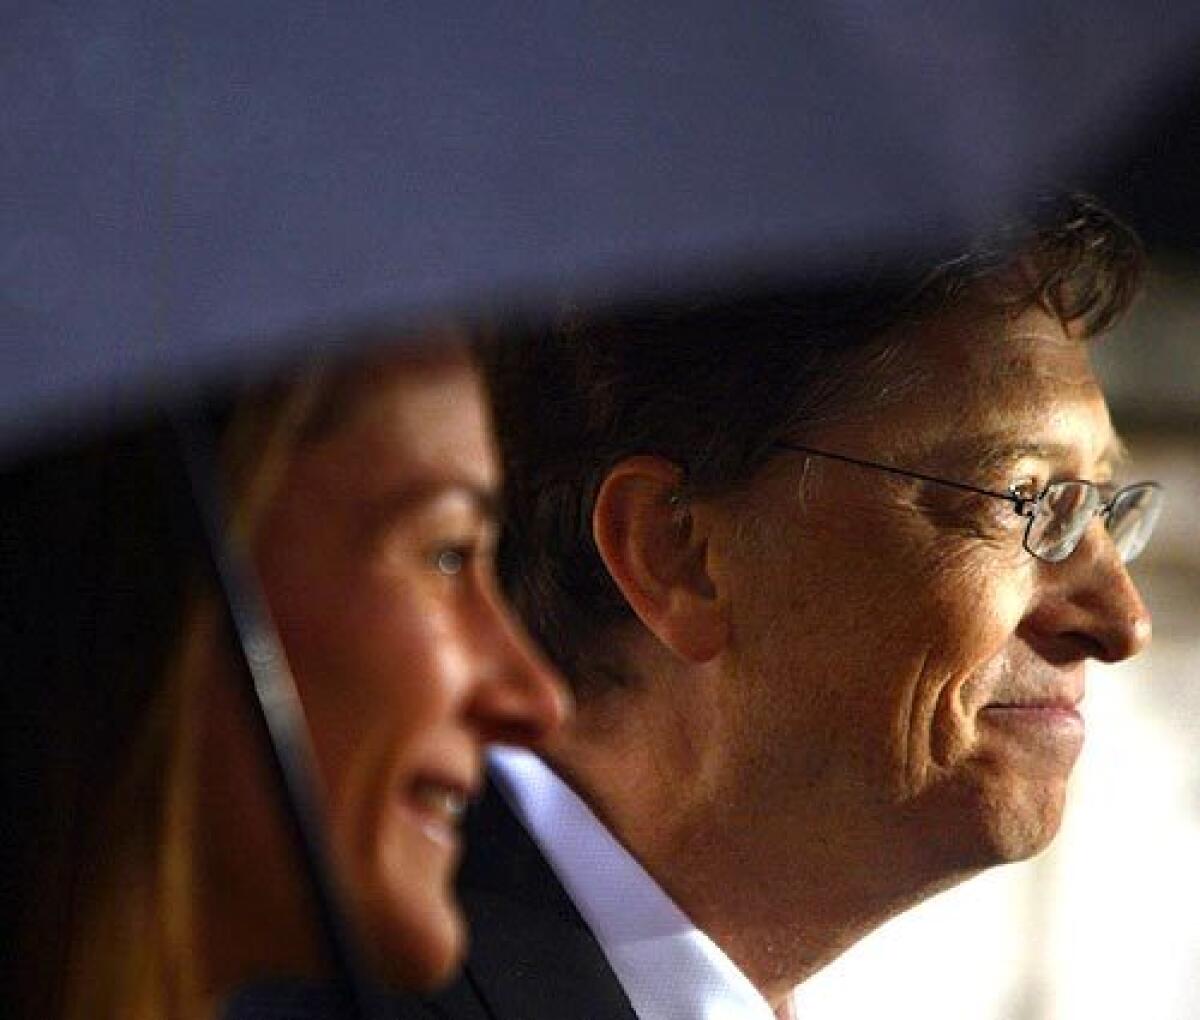 Chairman and Chief Software architect of Microsoft Bill Gates and his wife Melinda stand beneath an umbrella after he received an honorary knighthood at Buckingham Palace in London..